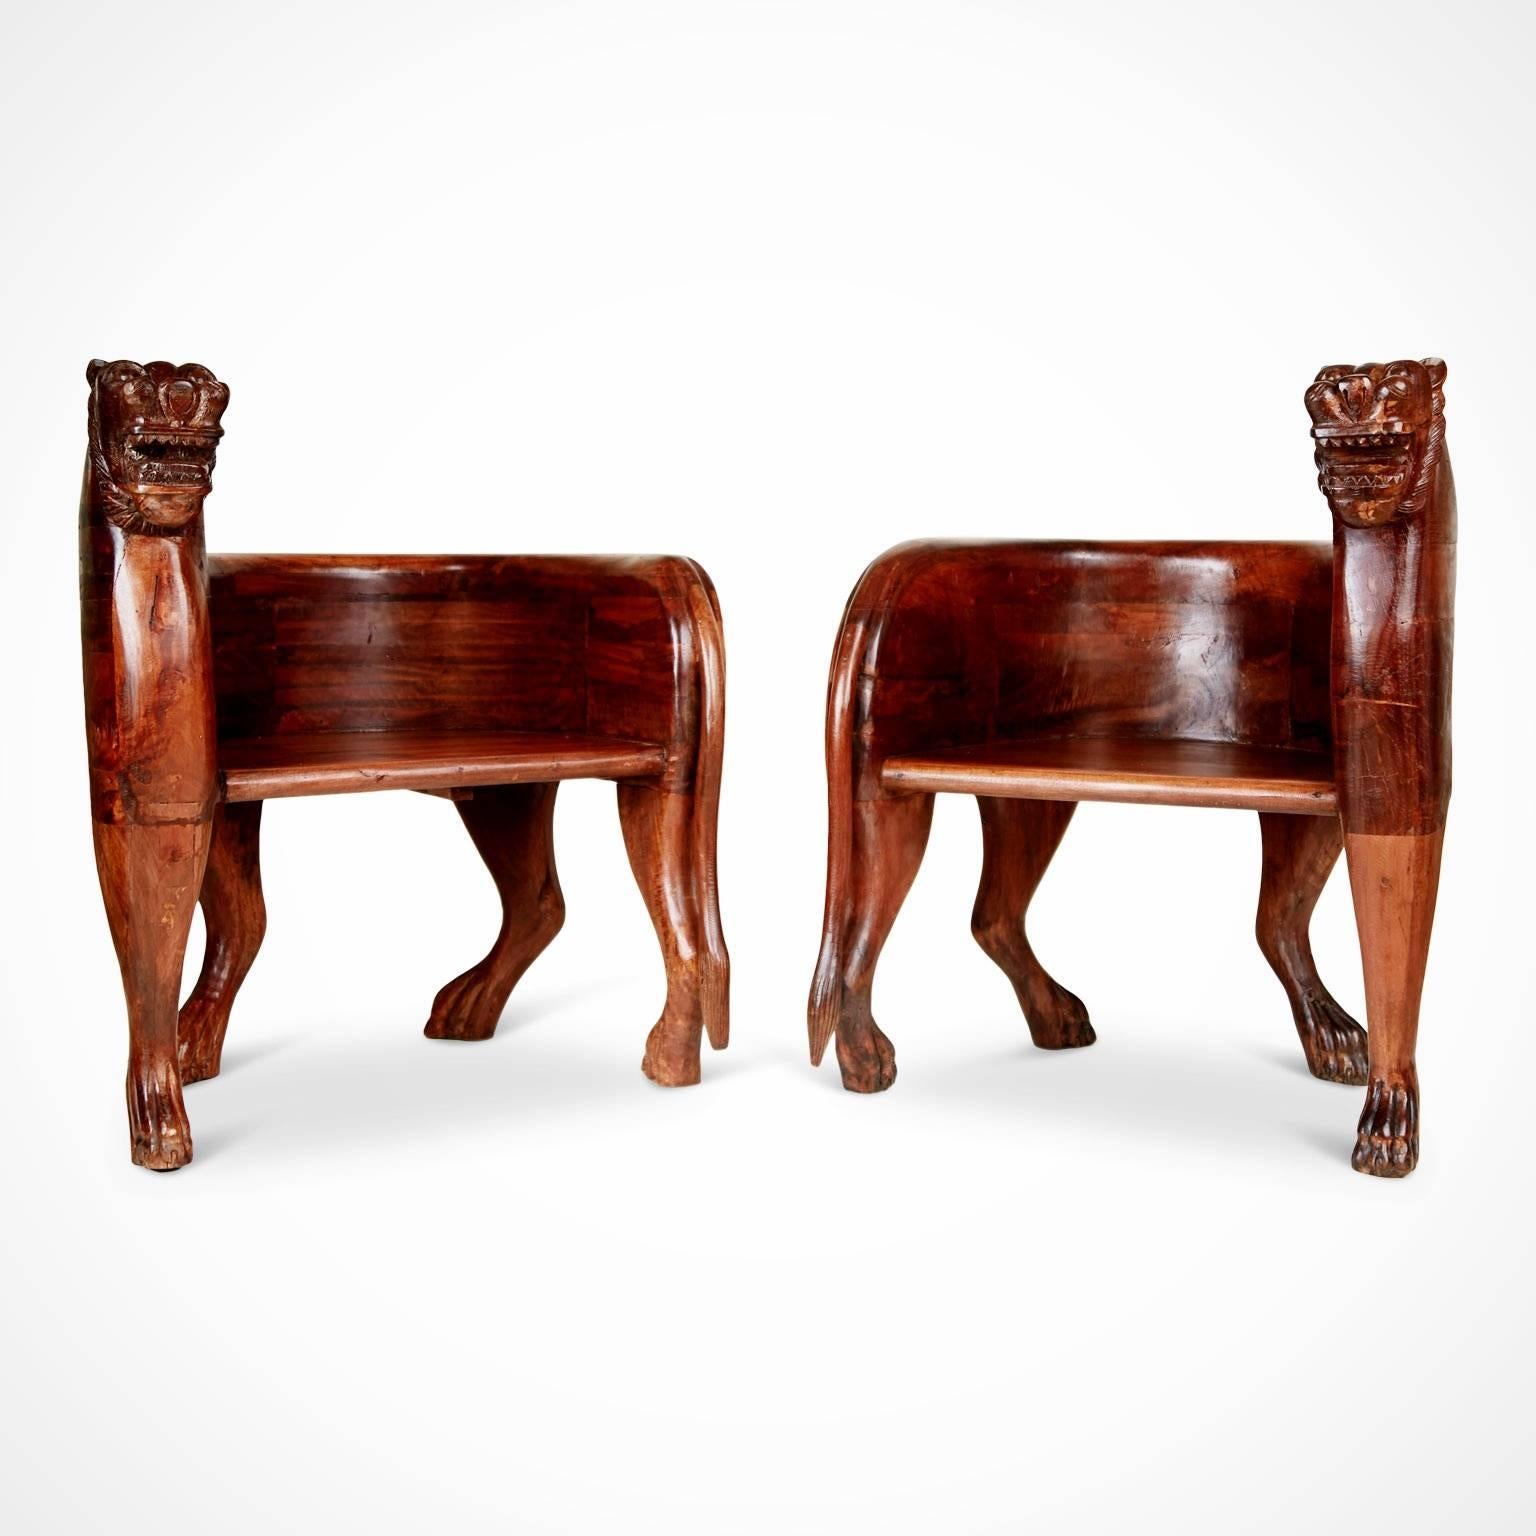 Tribal Figural Full Body Carved Teak Wood Lioness Club Chairs, Pair